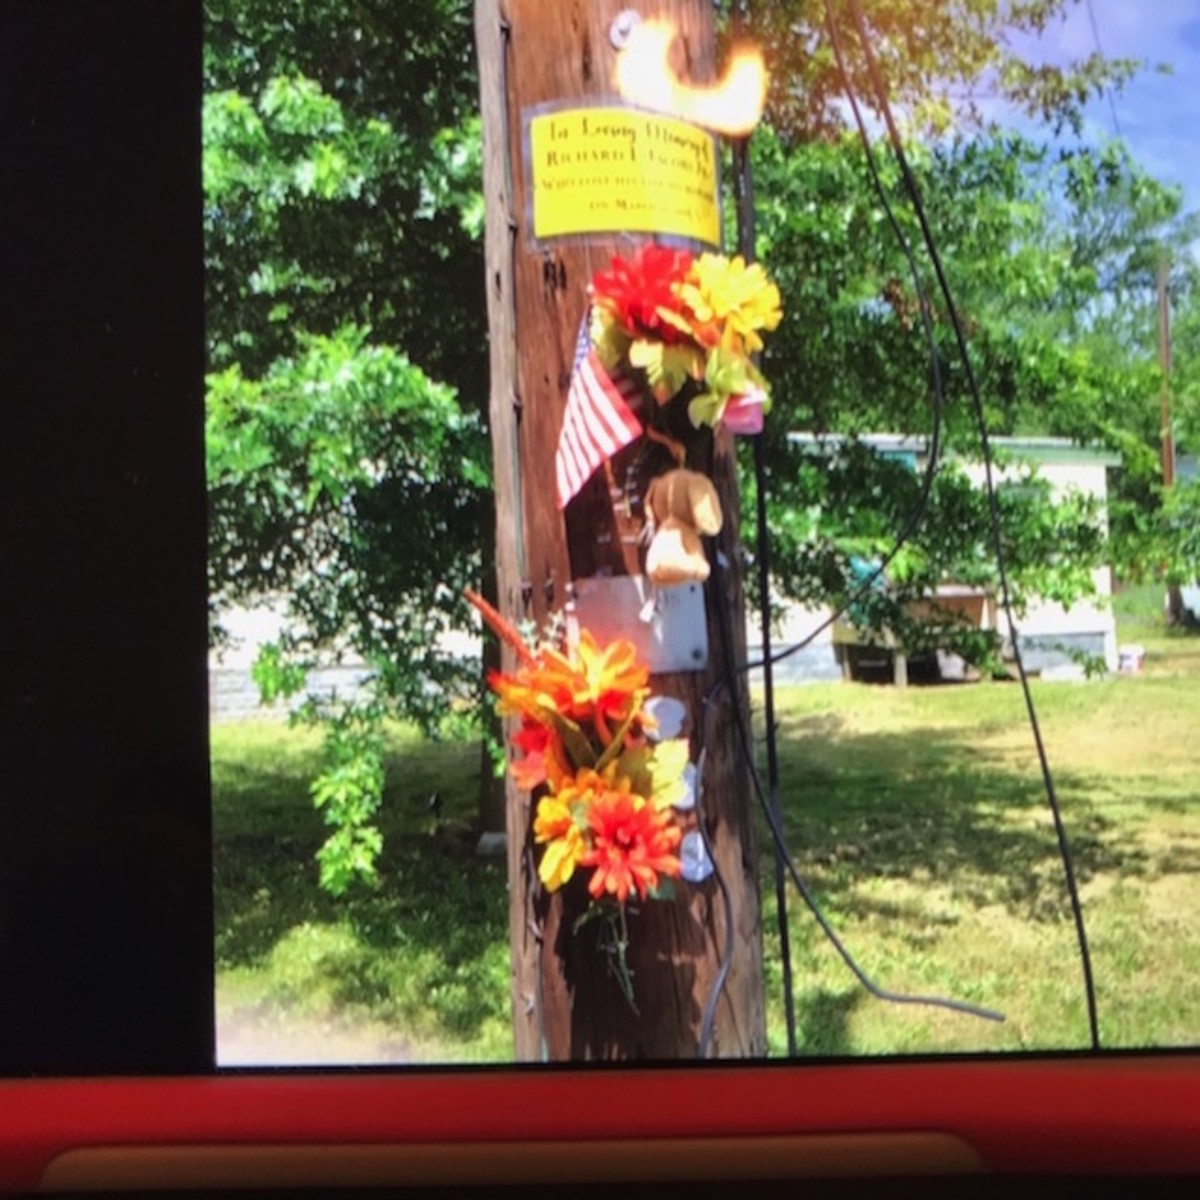 This is the memorial on a telephone pole near where Richard L. Jacobs Jr. drew his last breath.